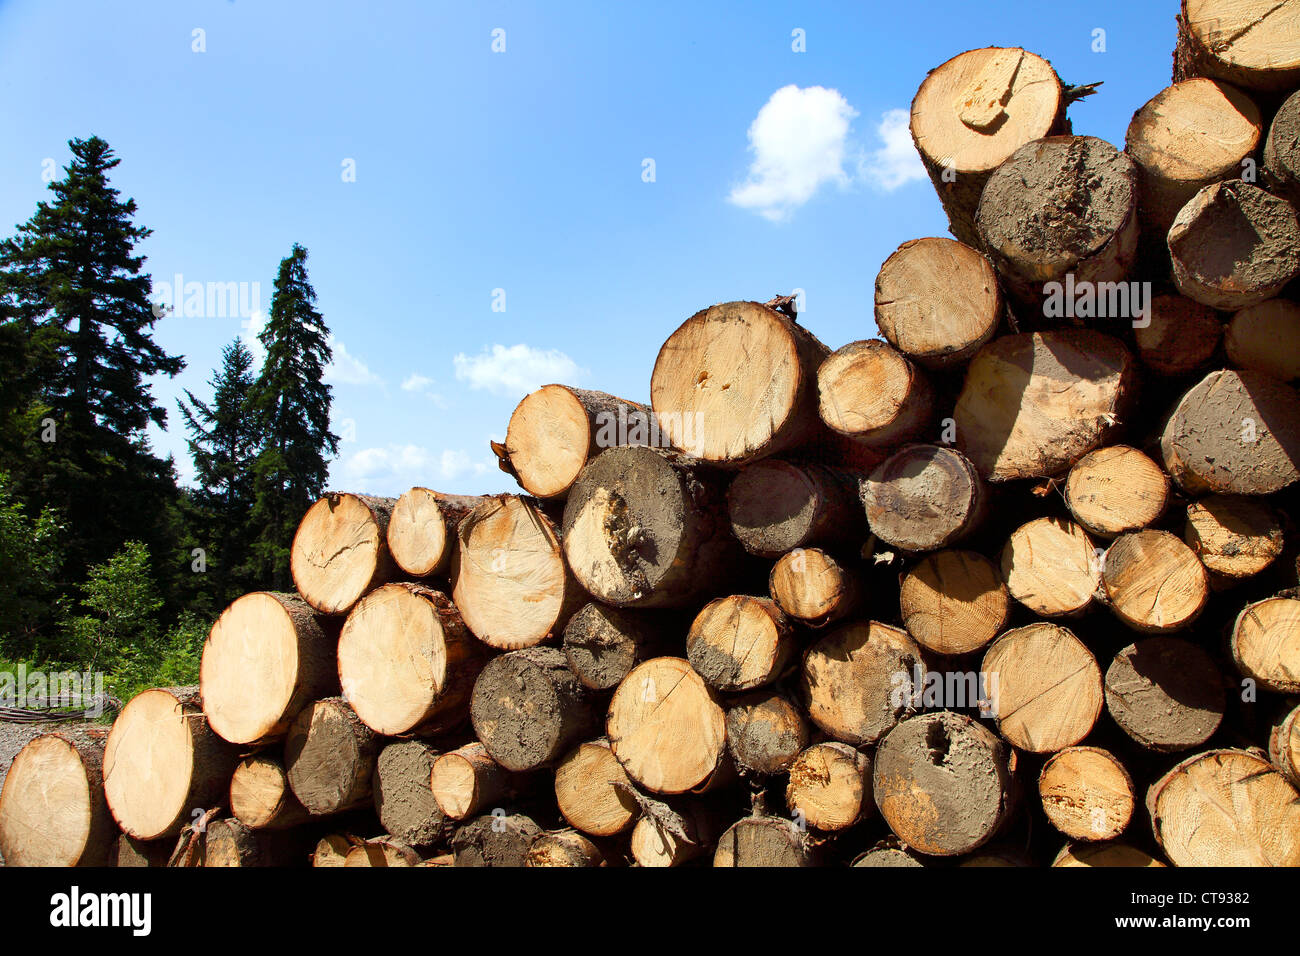 Woodpile in a forest. Stacked tree trunks, ready to be transported to a sawmill. Stock Photo